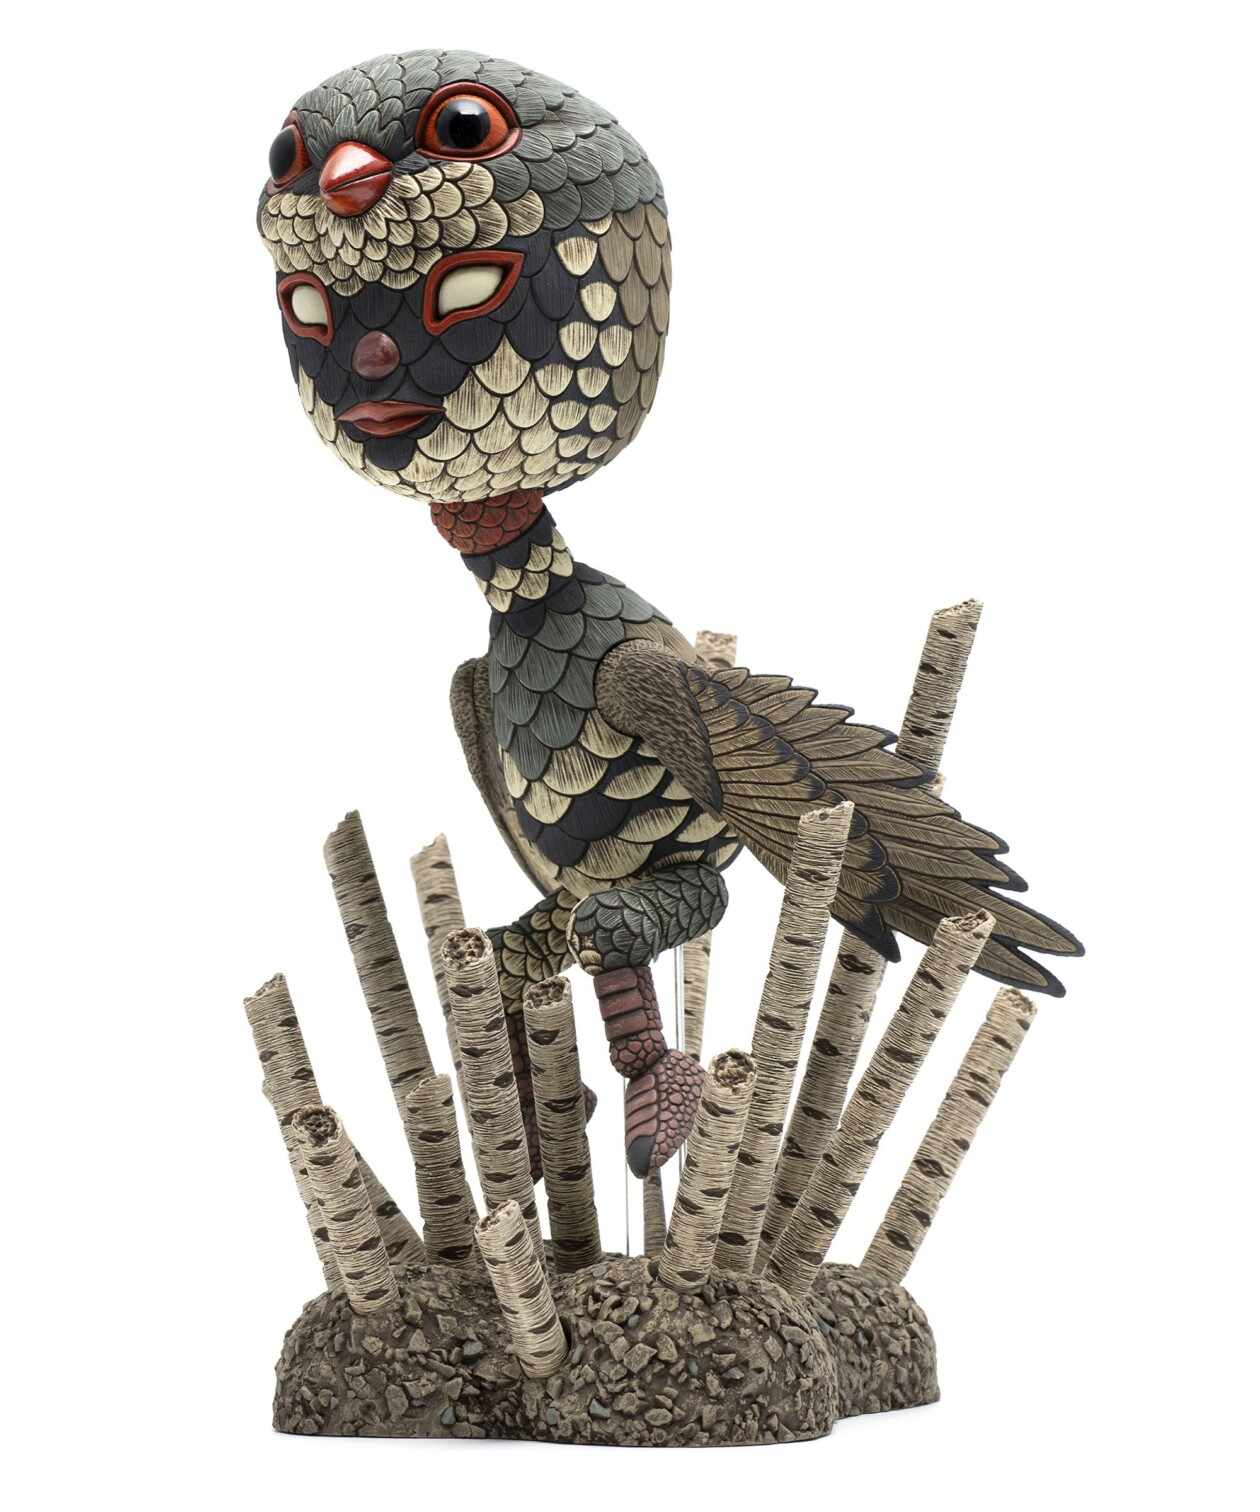 Marvelous Anthropomorphized Bird Sculptures By Calvin Ma (21)